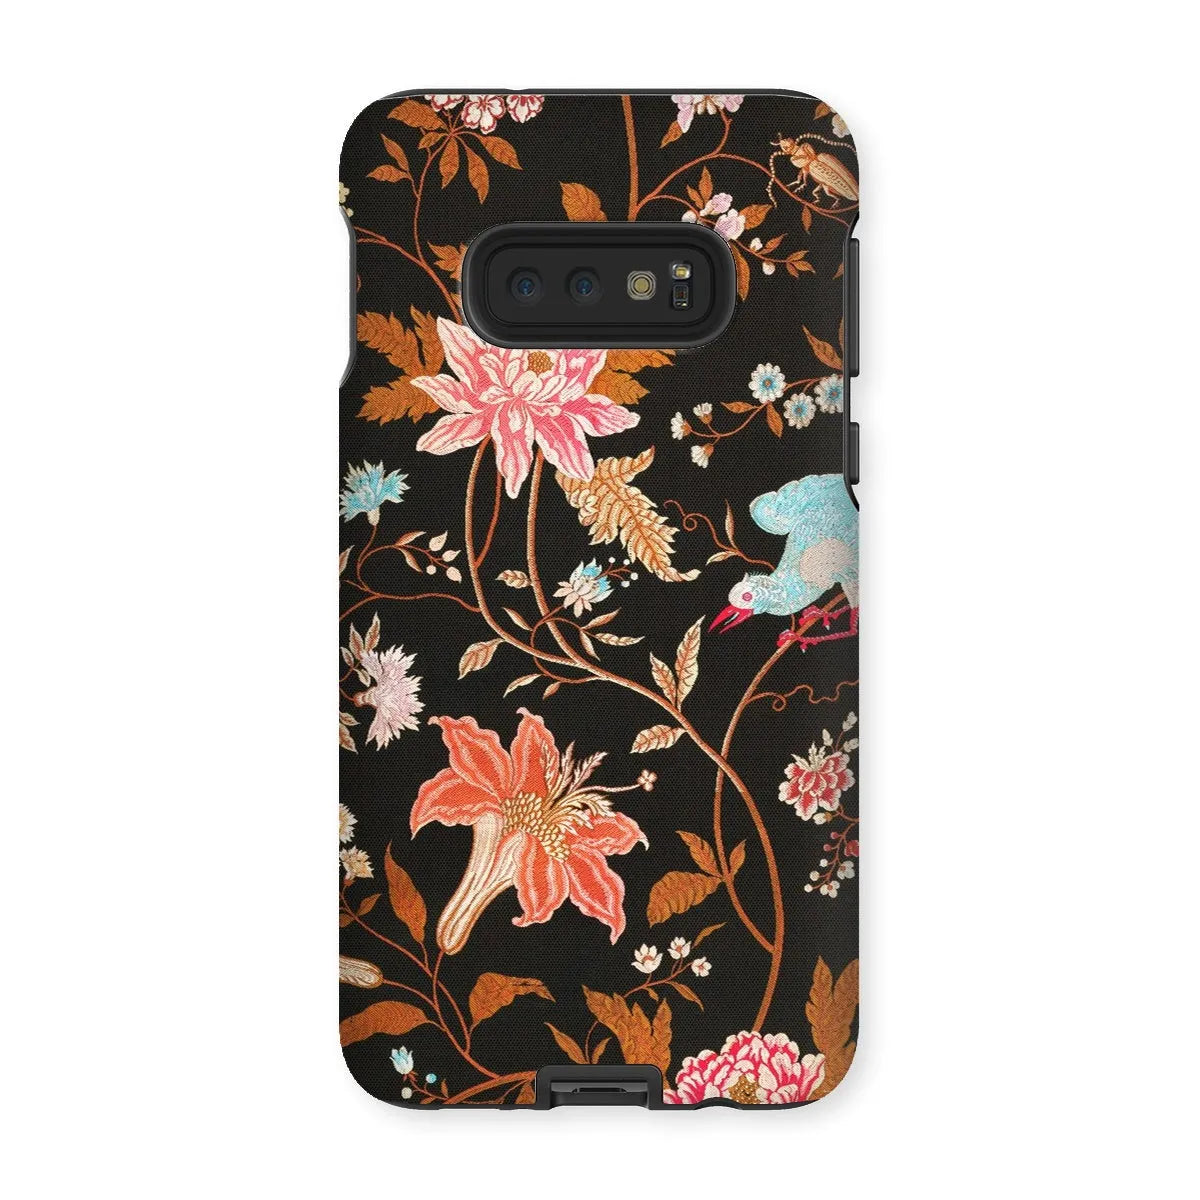 Midnight Call - Indian Aesthetic Fabric Art Phone Case - Samsung Galaxy S10e / Matte - Mobile Phone Cases - Aesthetic